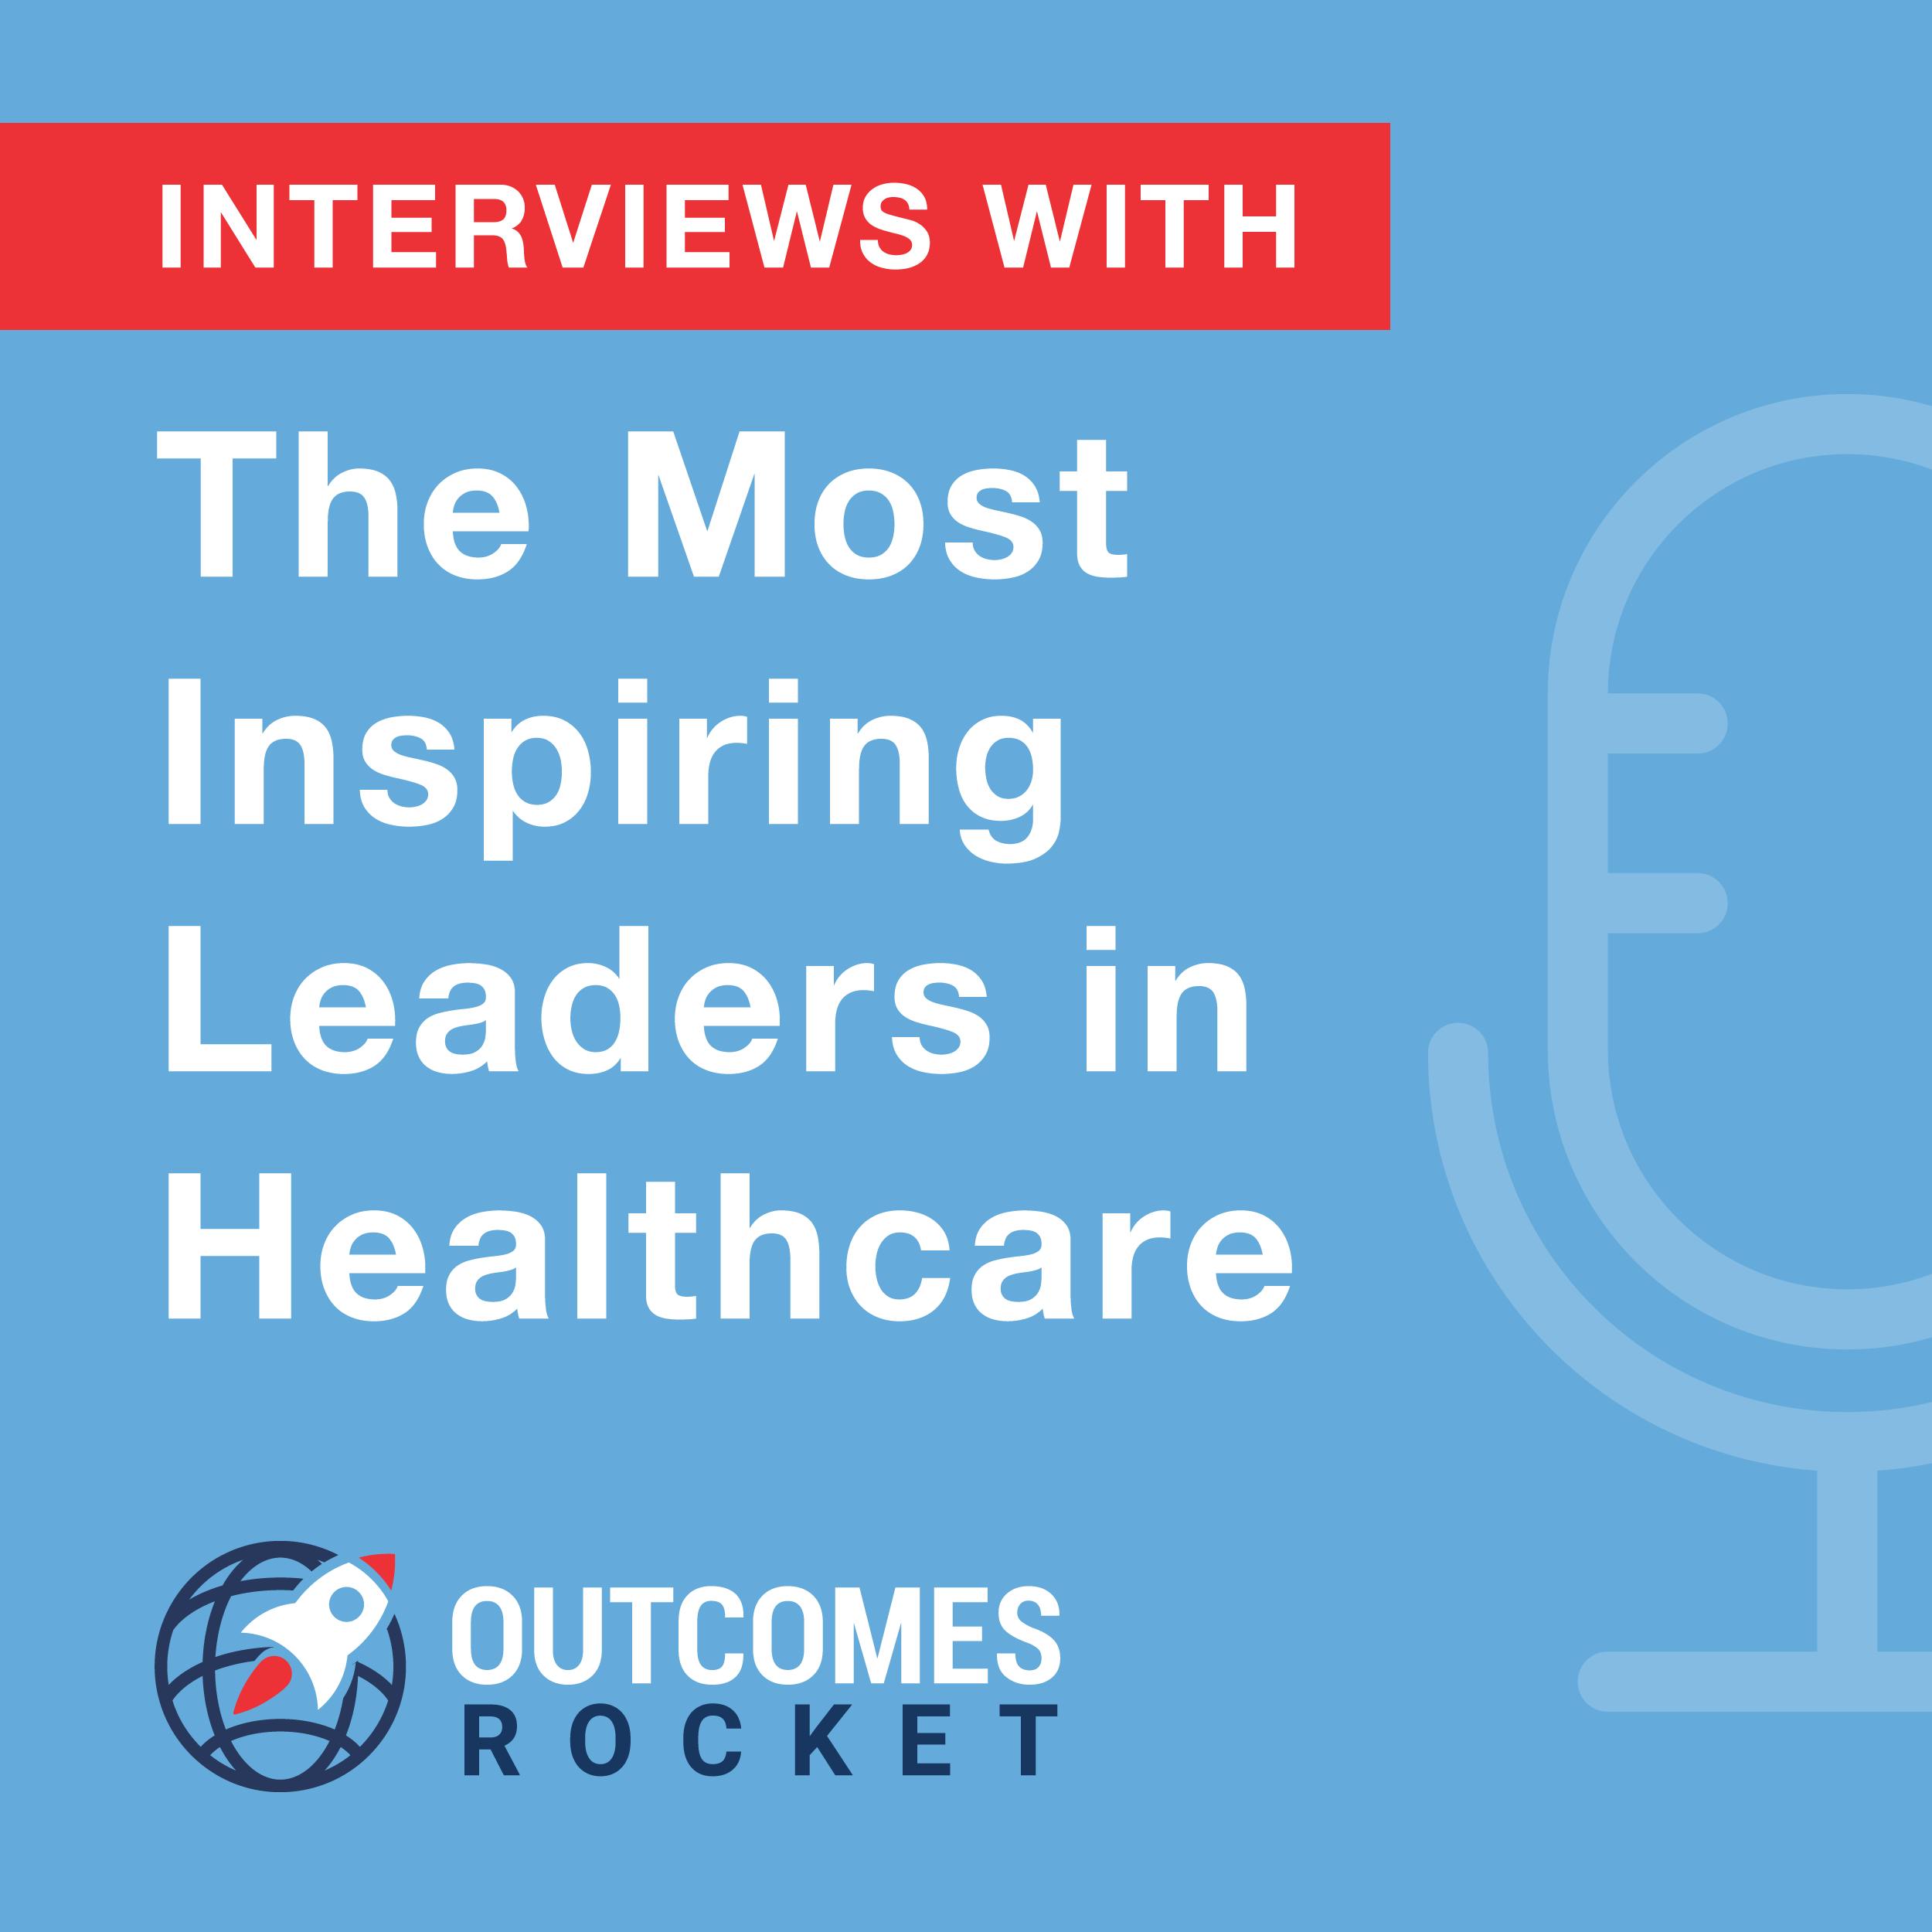 Insights from a CMO on Accountable Care Organizations with Sarika Aggarwal, MD, MHCM, Chief Medical Officer at Beth Israel Deaconess Care Organization